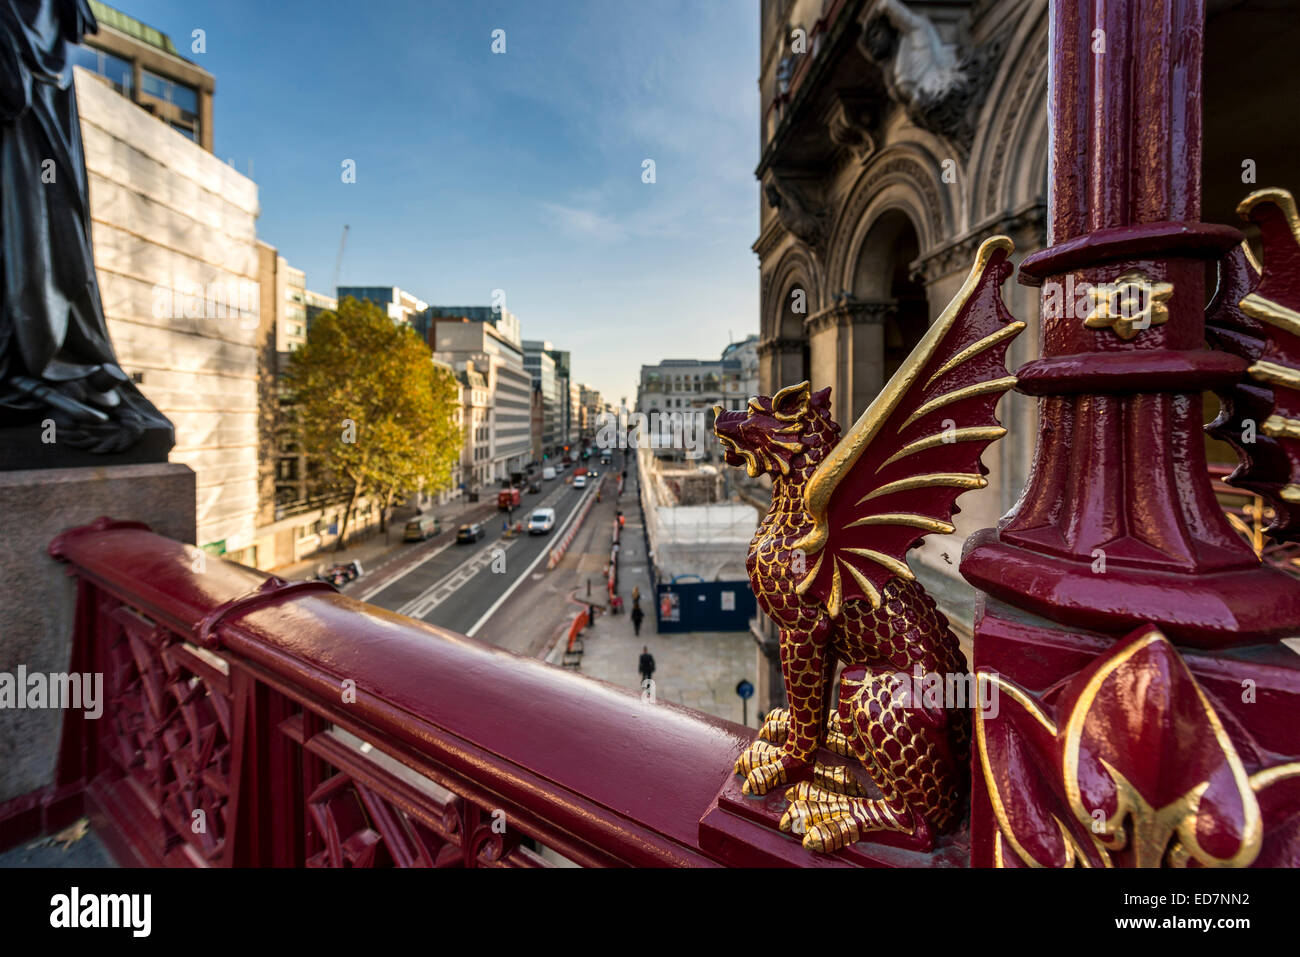 Dragons, a symbol of the City of London, as decoration on Holborn Viaduct, a road bridge in London Stock Photo